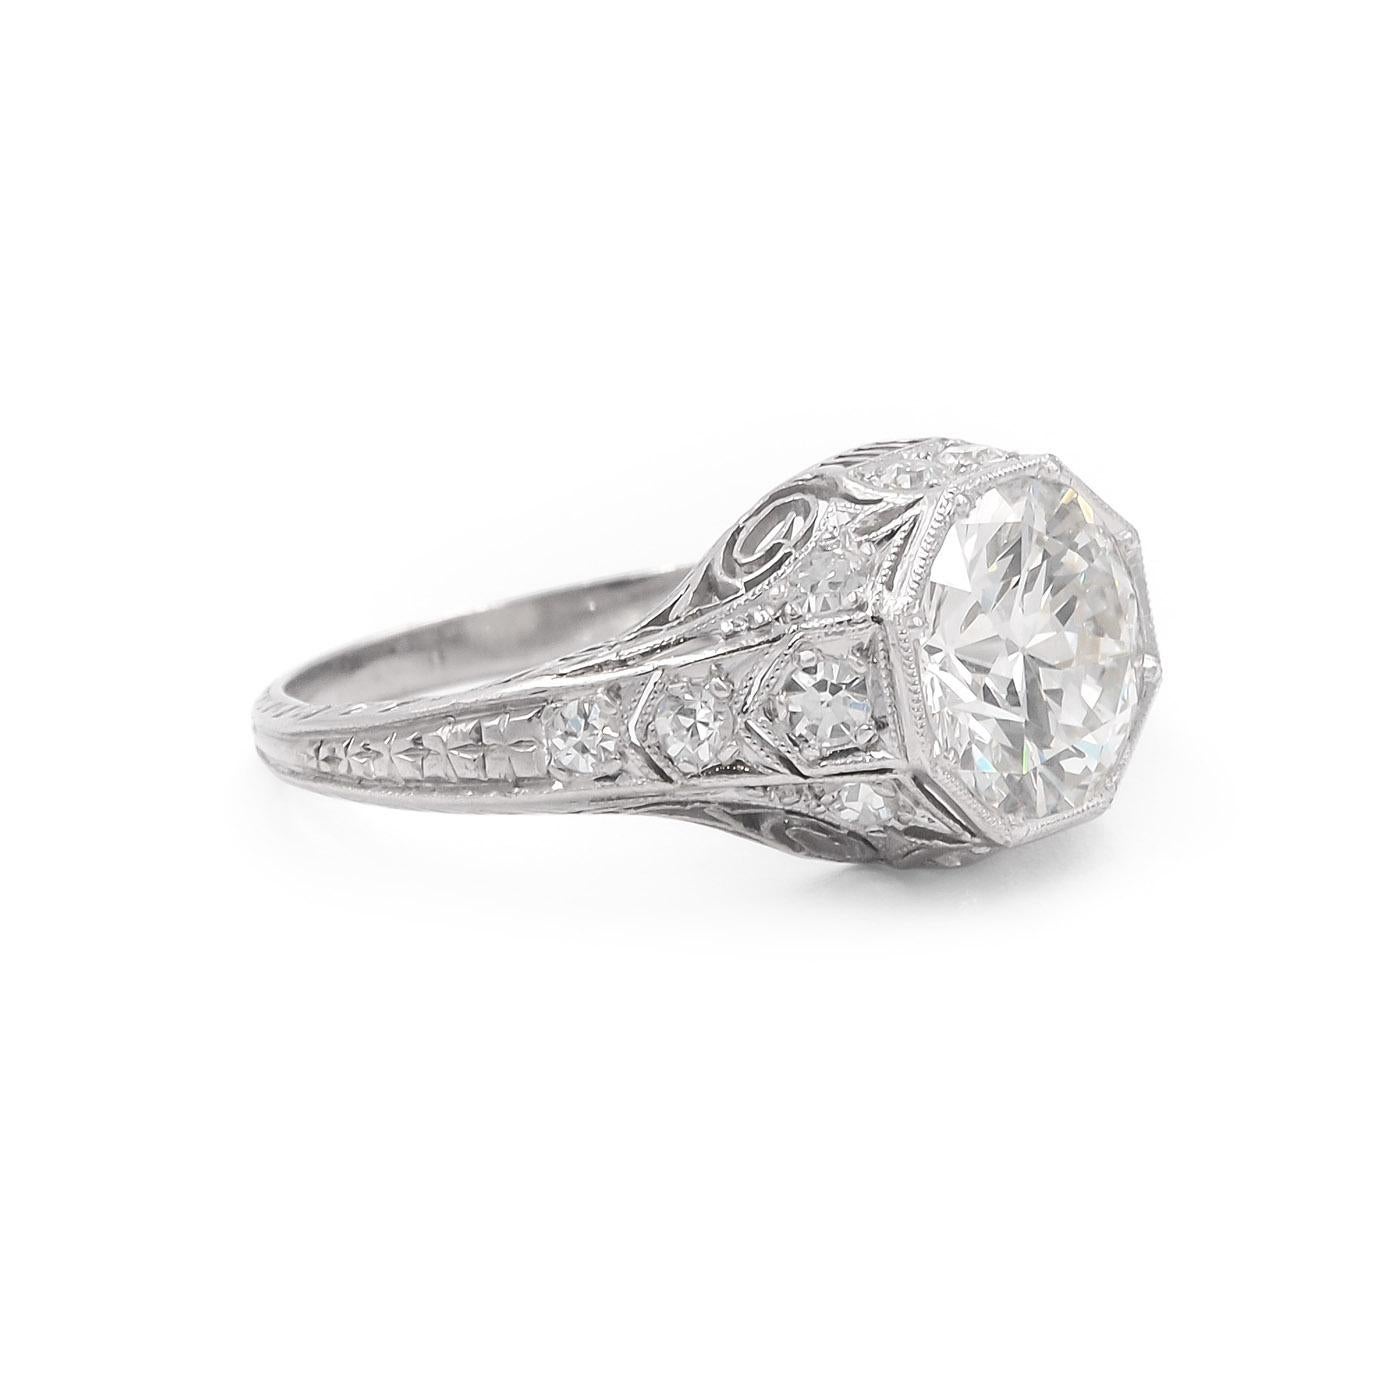 A fine example of Art Deco Era craftsmanship. The 1.97 Carat Transitional (Early Round Brilliant) Cut Diamond Engagement Ring is composed of platinum. GIA certified L color & VS2 clarity. Also set with 14 Single Cut diamonds weighing approximately